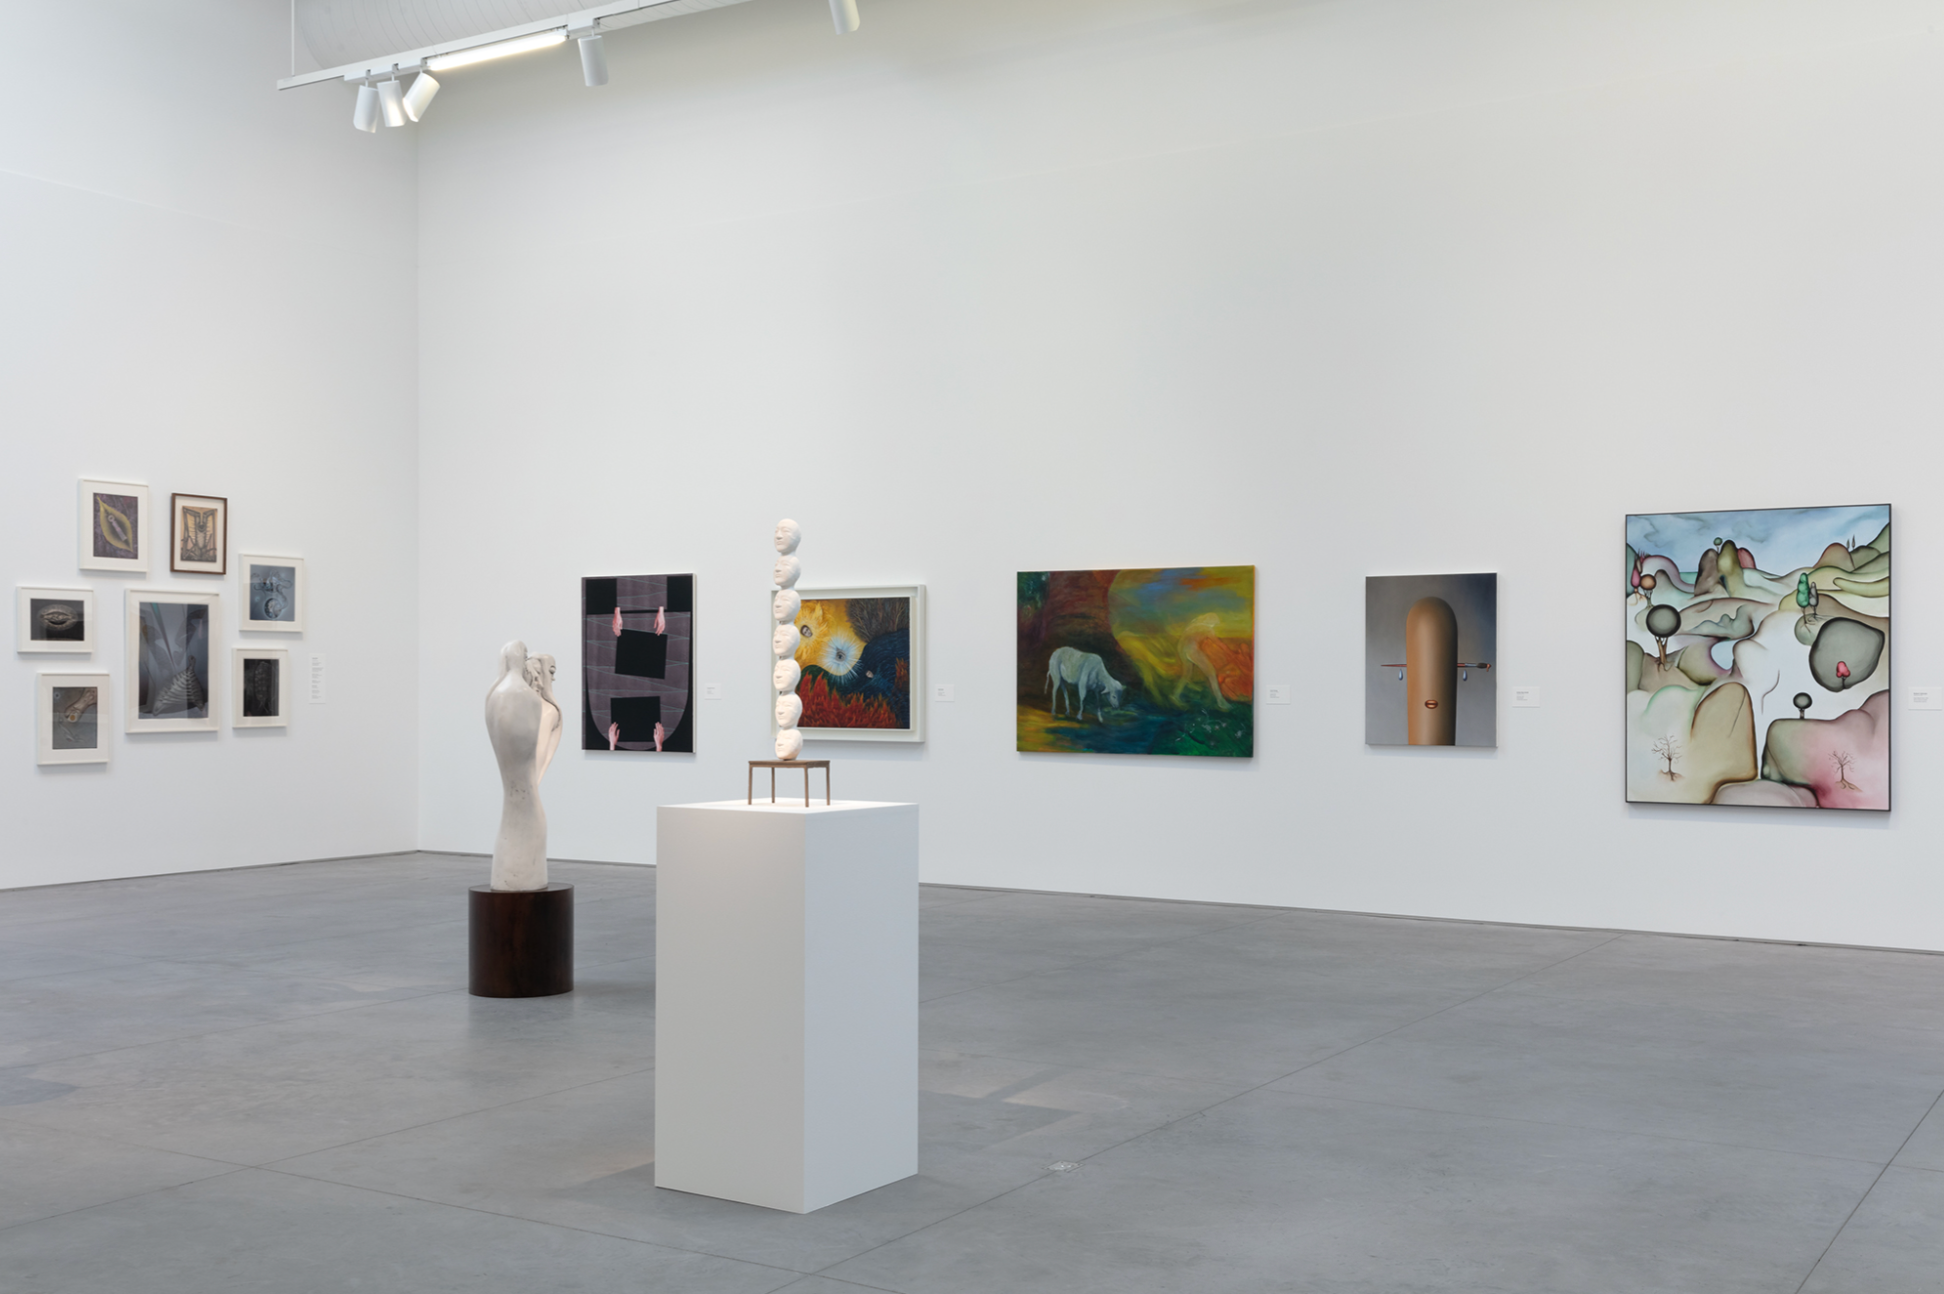 Installation view of the exhibition Room by Room: Concepts, Themes, and Artists, at the The Rachofsky Collection, in Dallas, Texas, dated 2023.